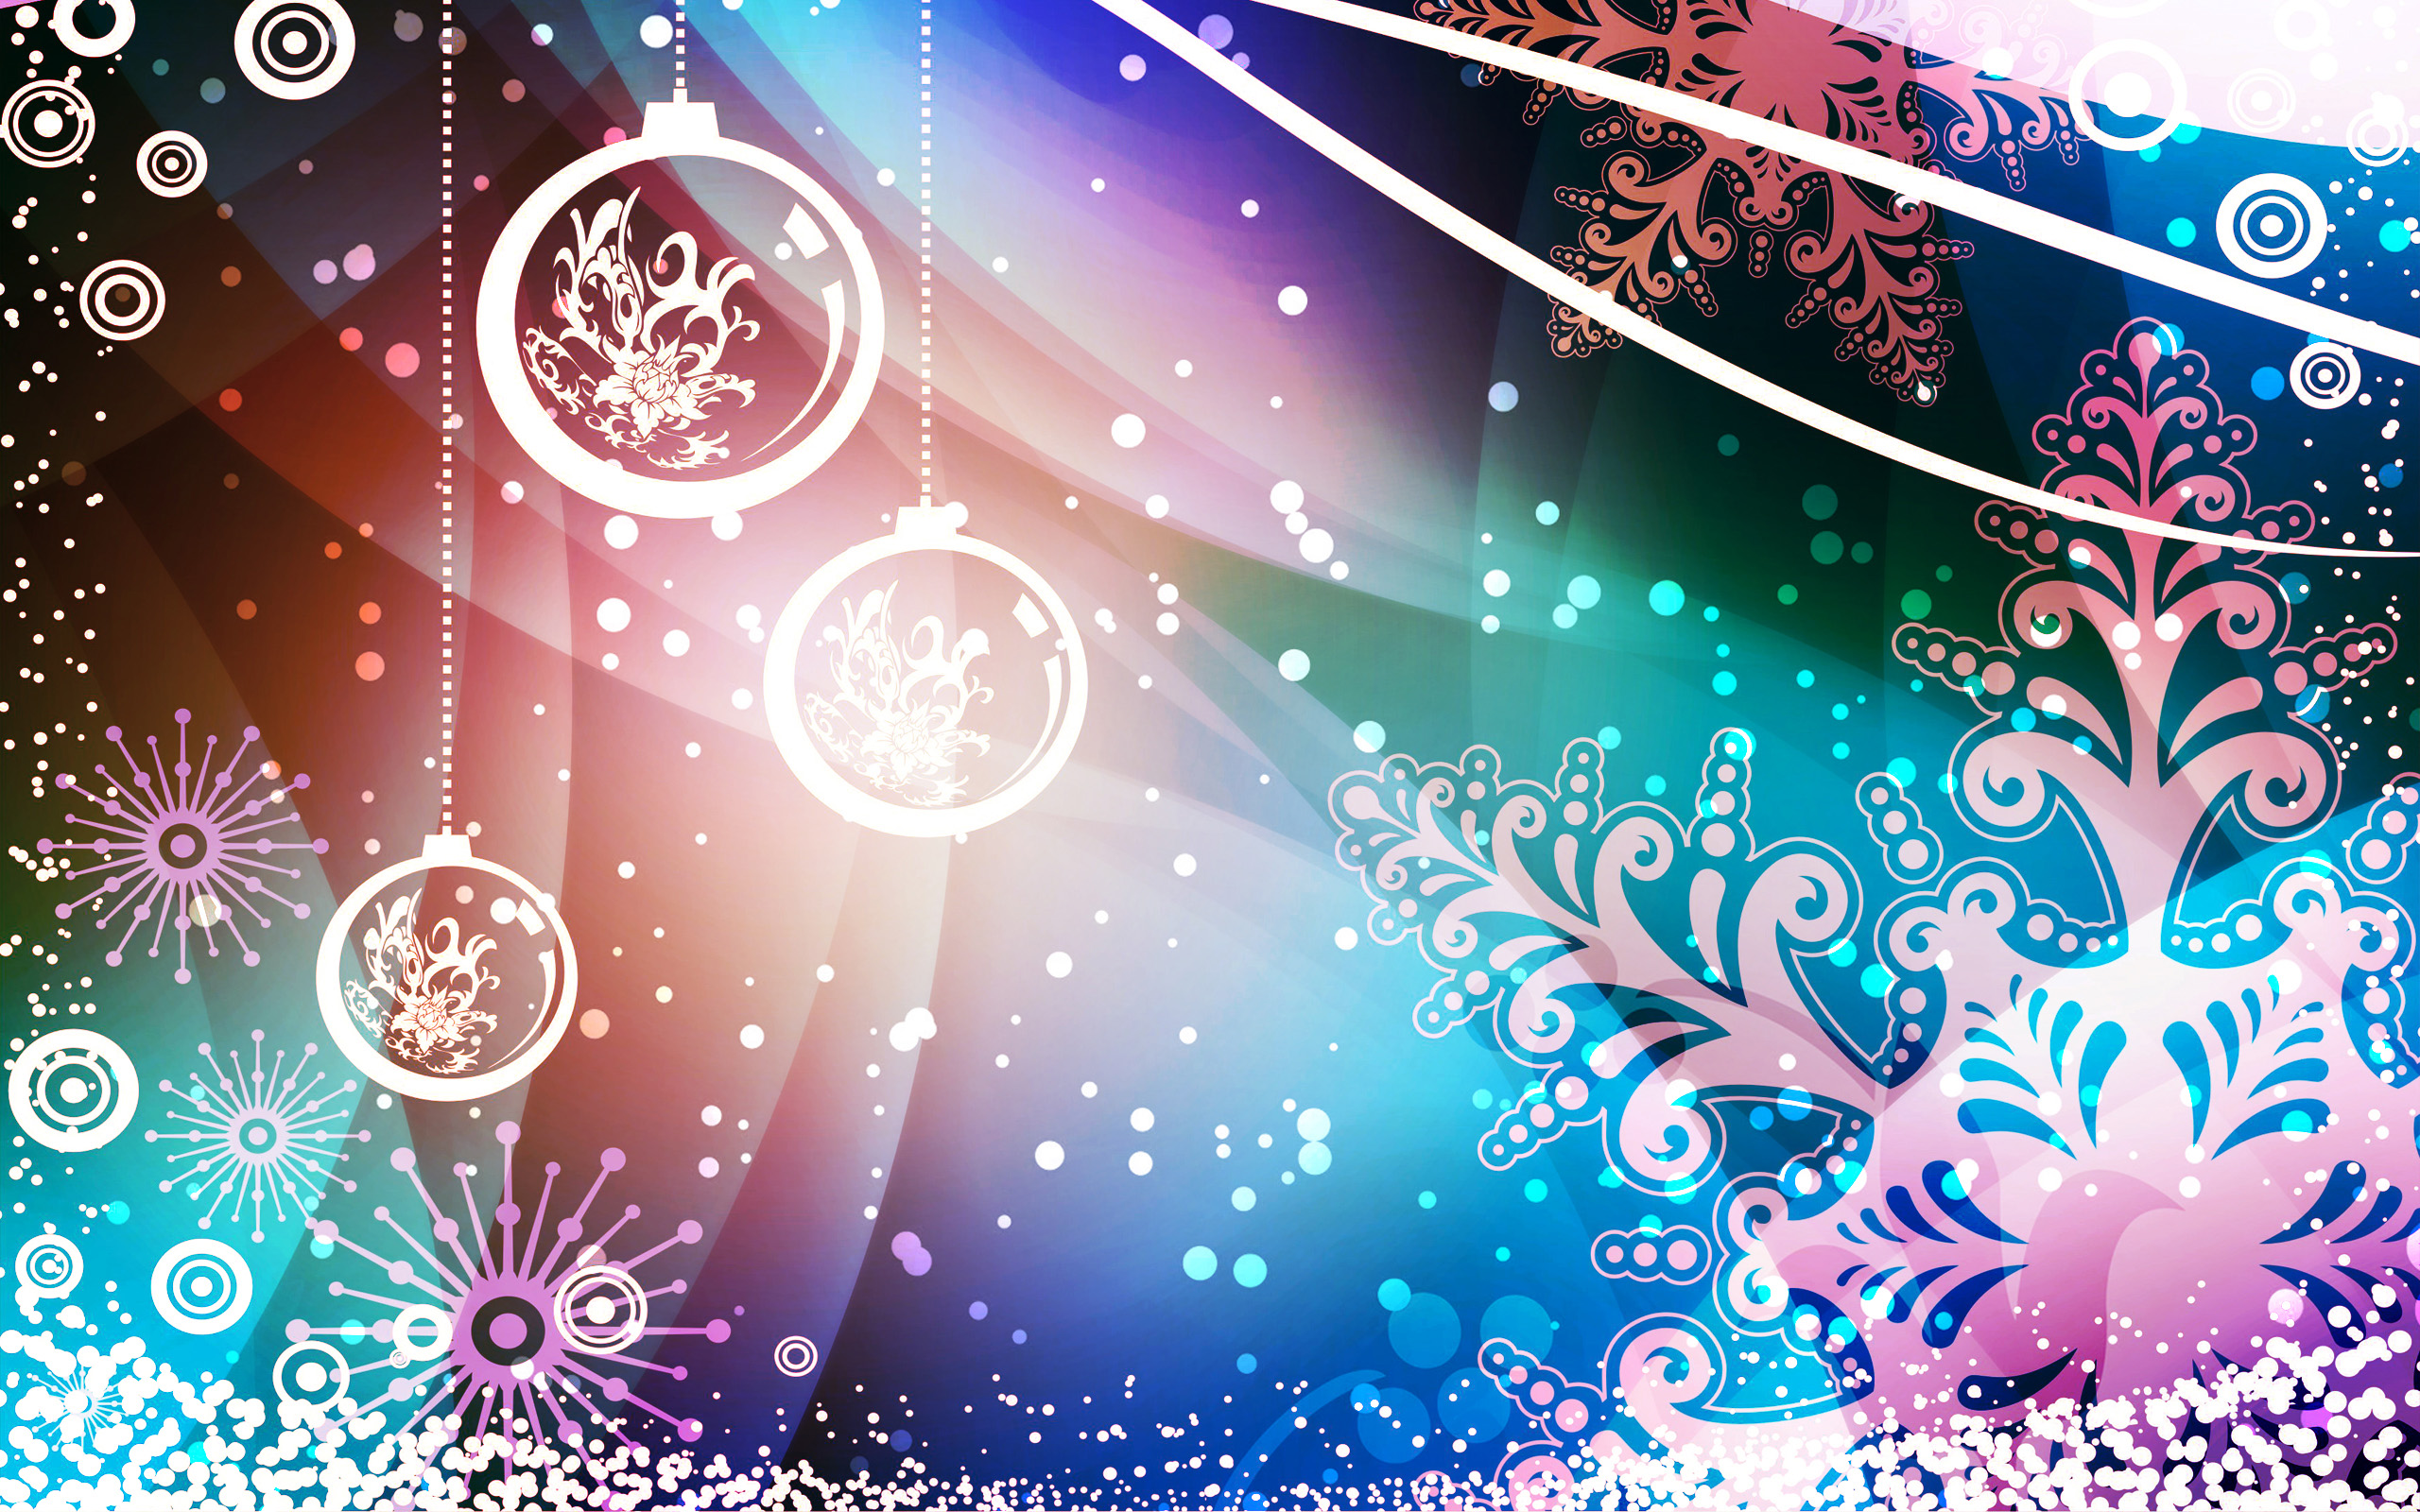 Free Christmas Backgrounds 6919599